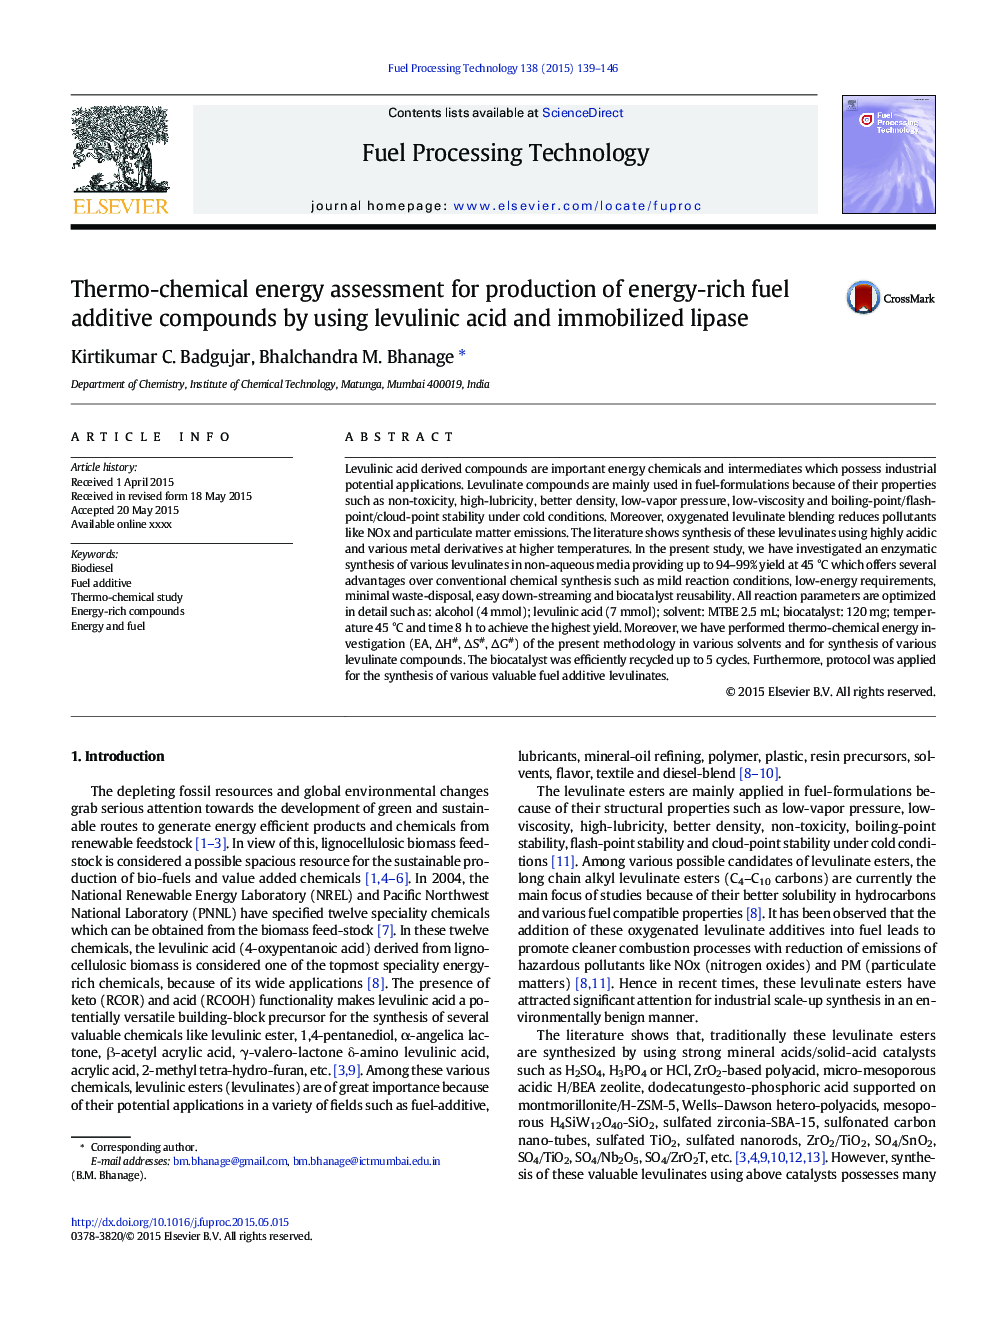 Thermo-chemical energy assessment for production of energy-rich fuel additive compounds by using levulinic acid and immobilized lipase